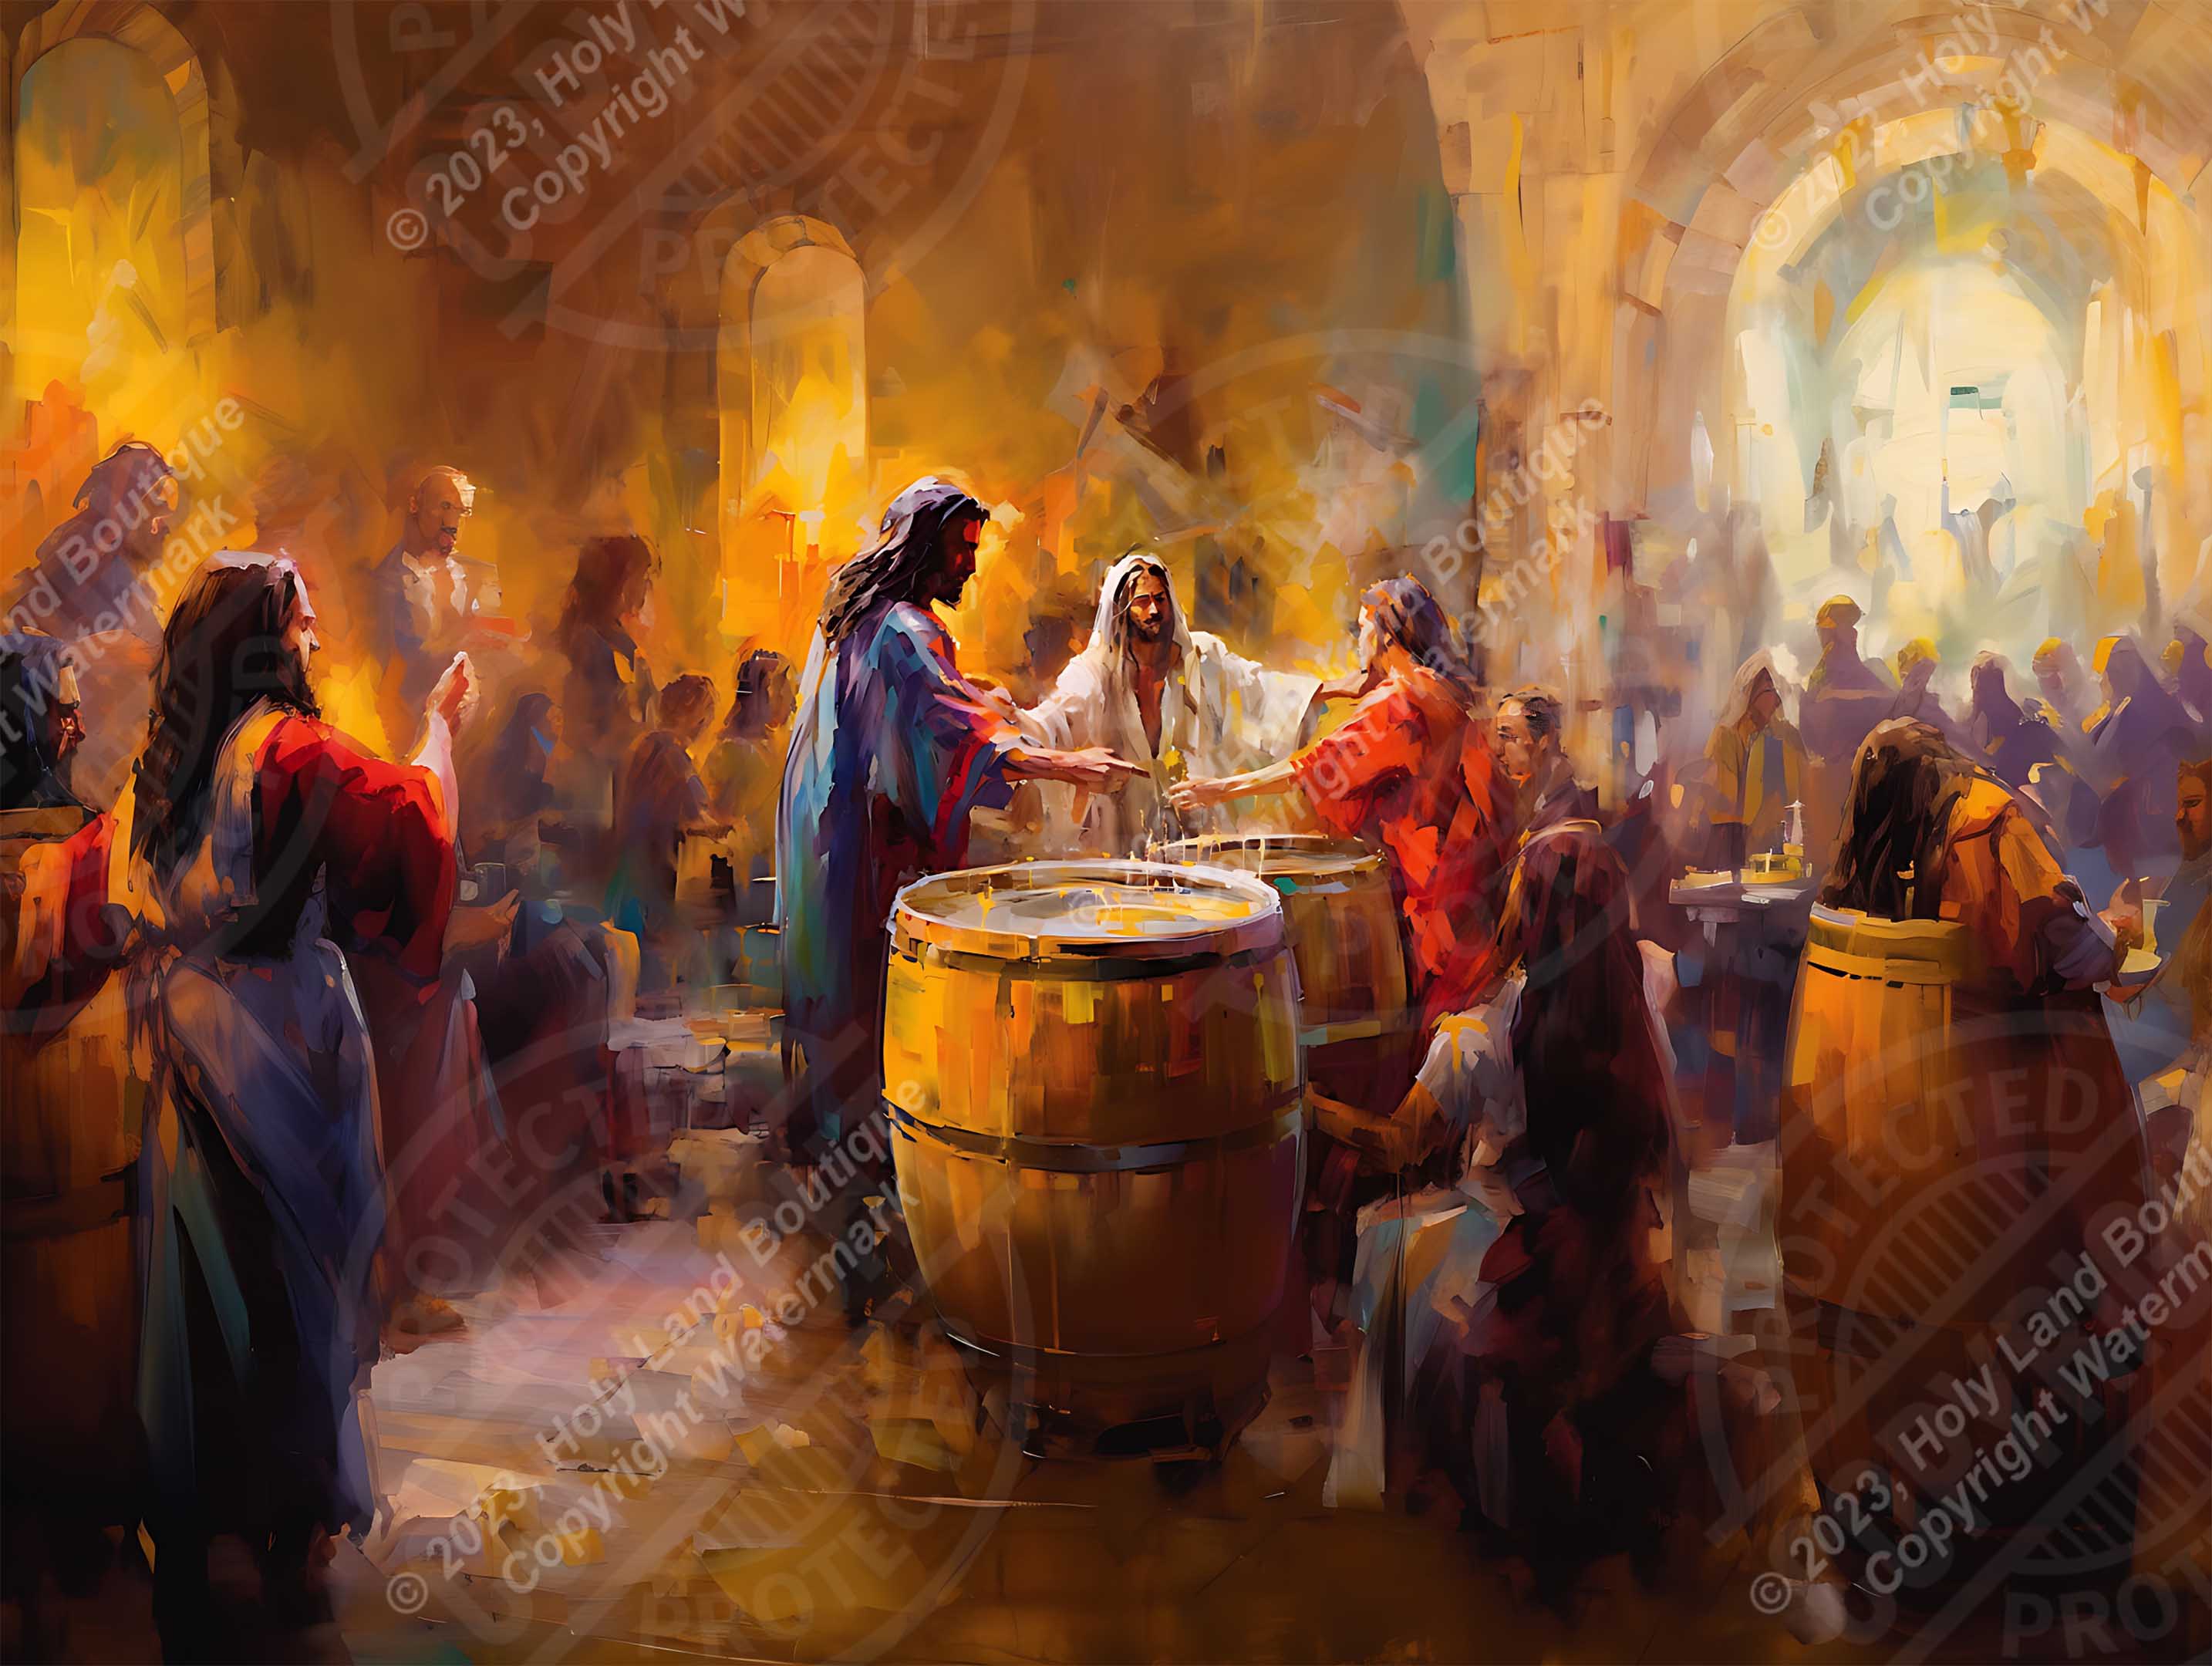 Water Into Wine At Cana Painting